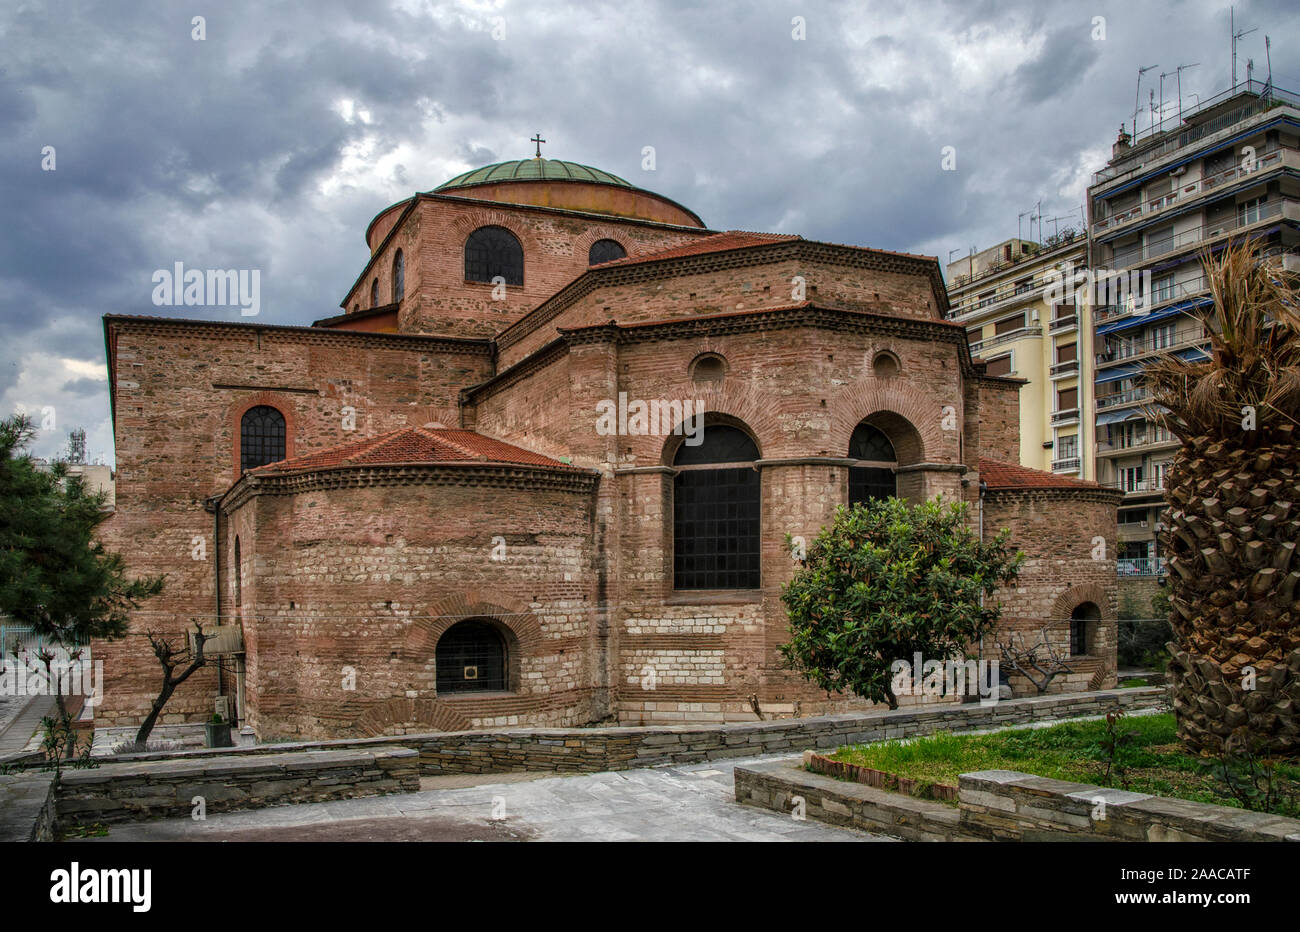 THESSALONIKI, GREECE - MARCH 26, 2017: Ancient Byzantine Orthodox Hagia Sophia Cathedral in the center of city of Thessaloniki, Central Macedonia, Gre Stock Photo